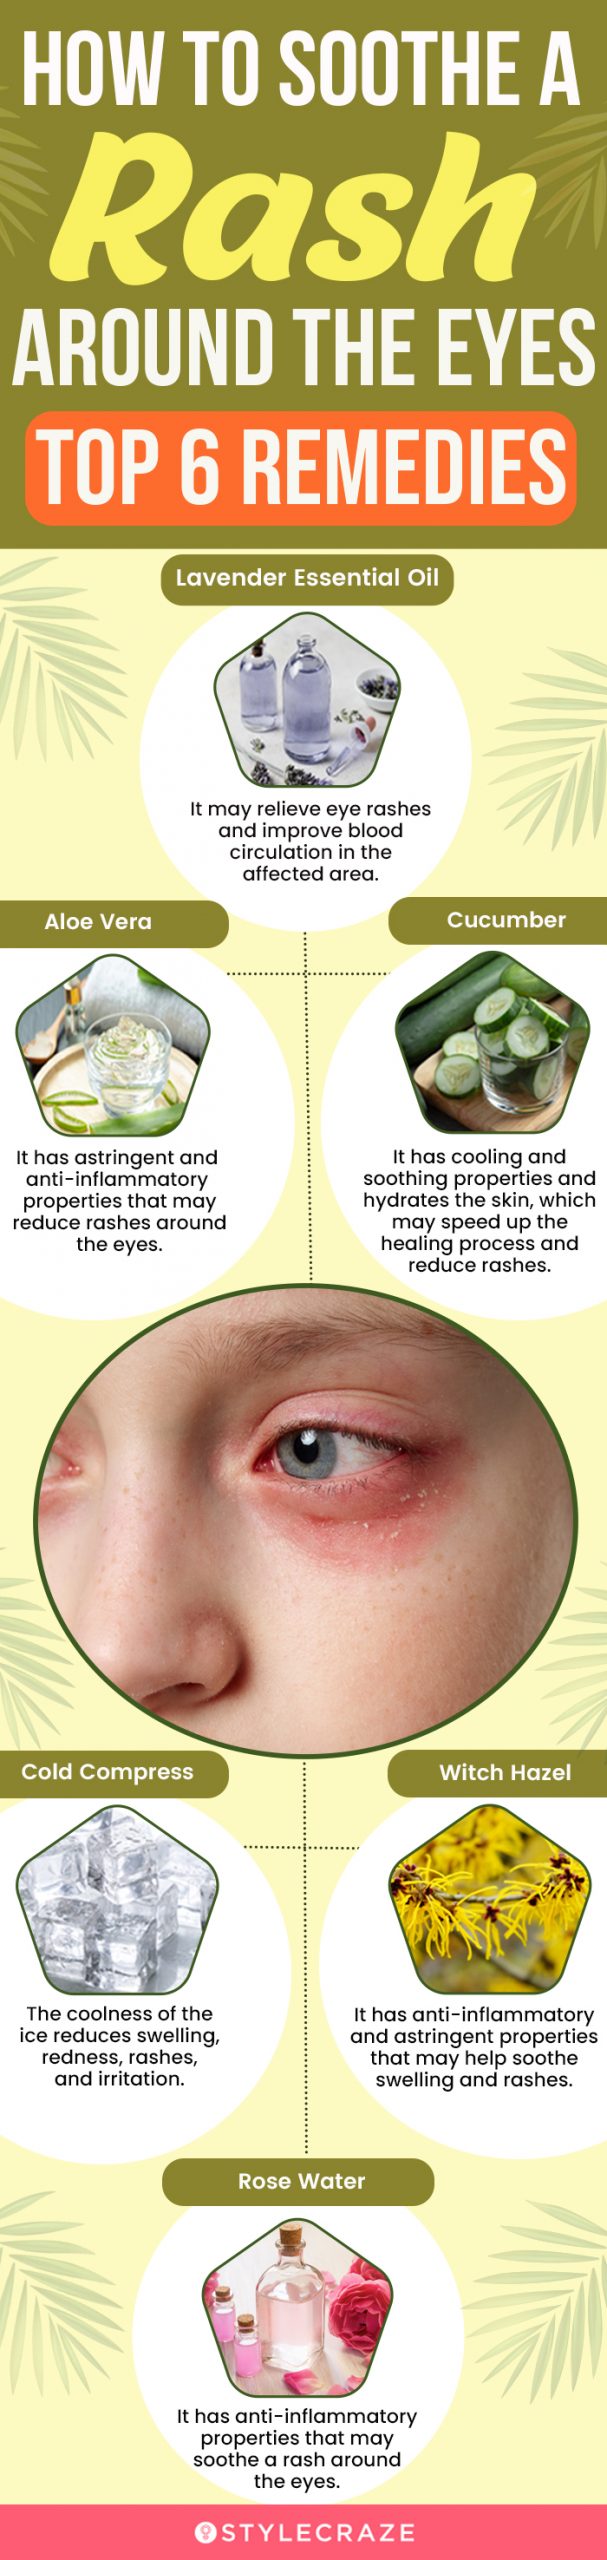 how to soothe a rash around the eyes top 6 remedies (infographic)